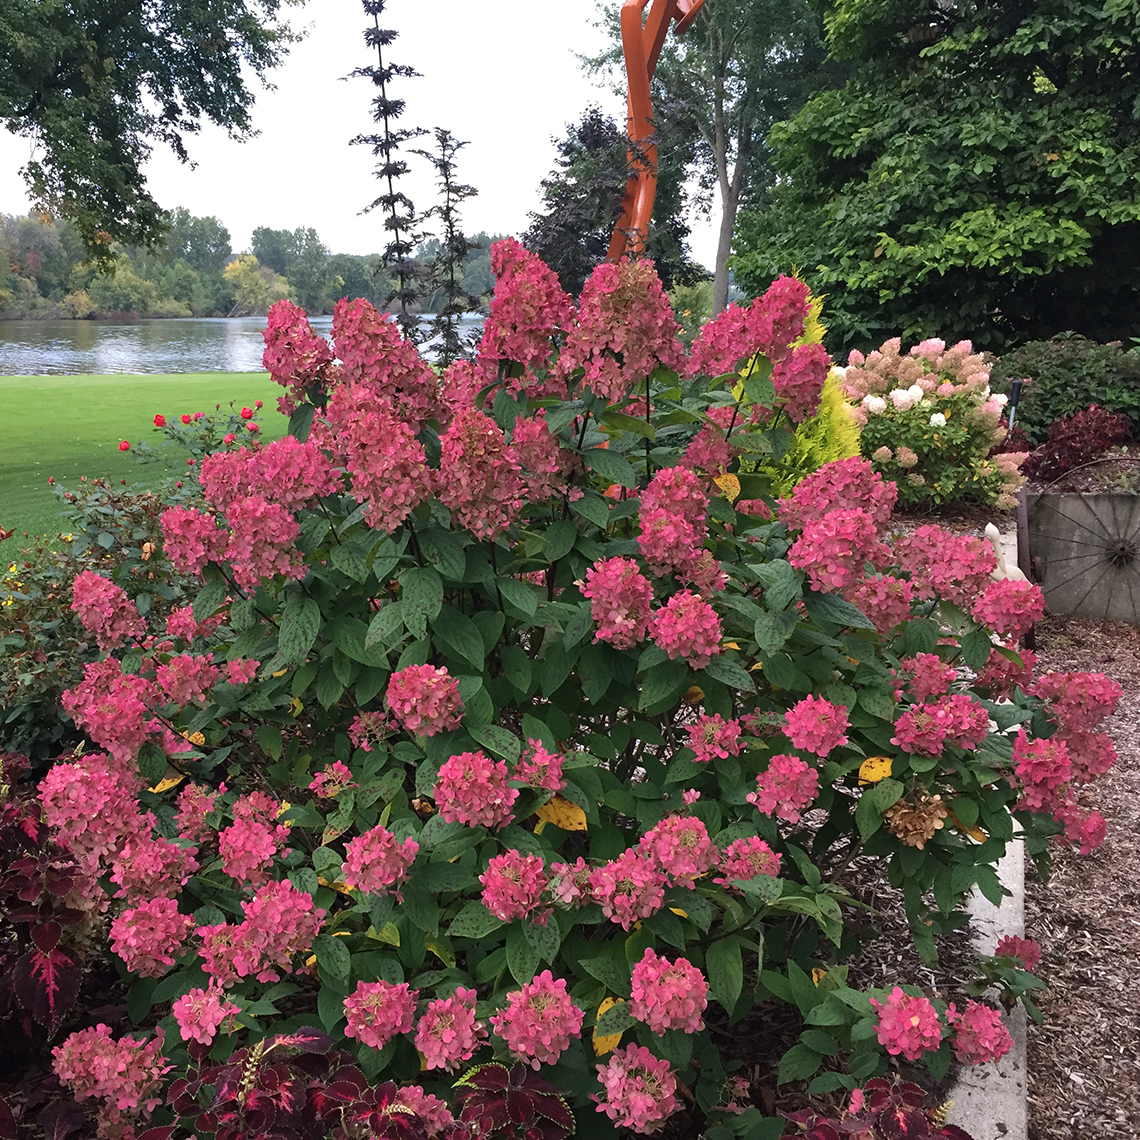 A single specimen of Fire Light panicle hydrangea covered in red mophead blooms